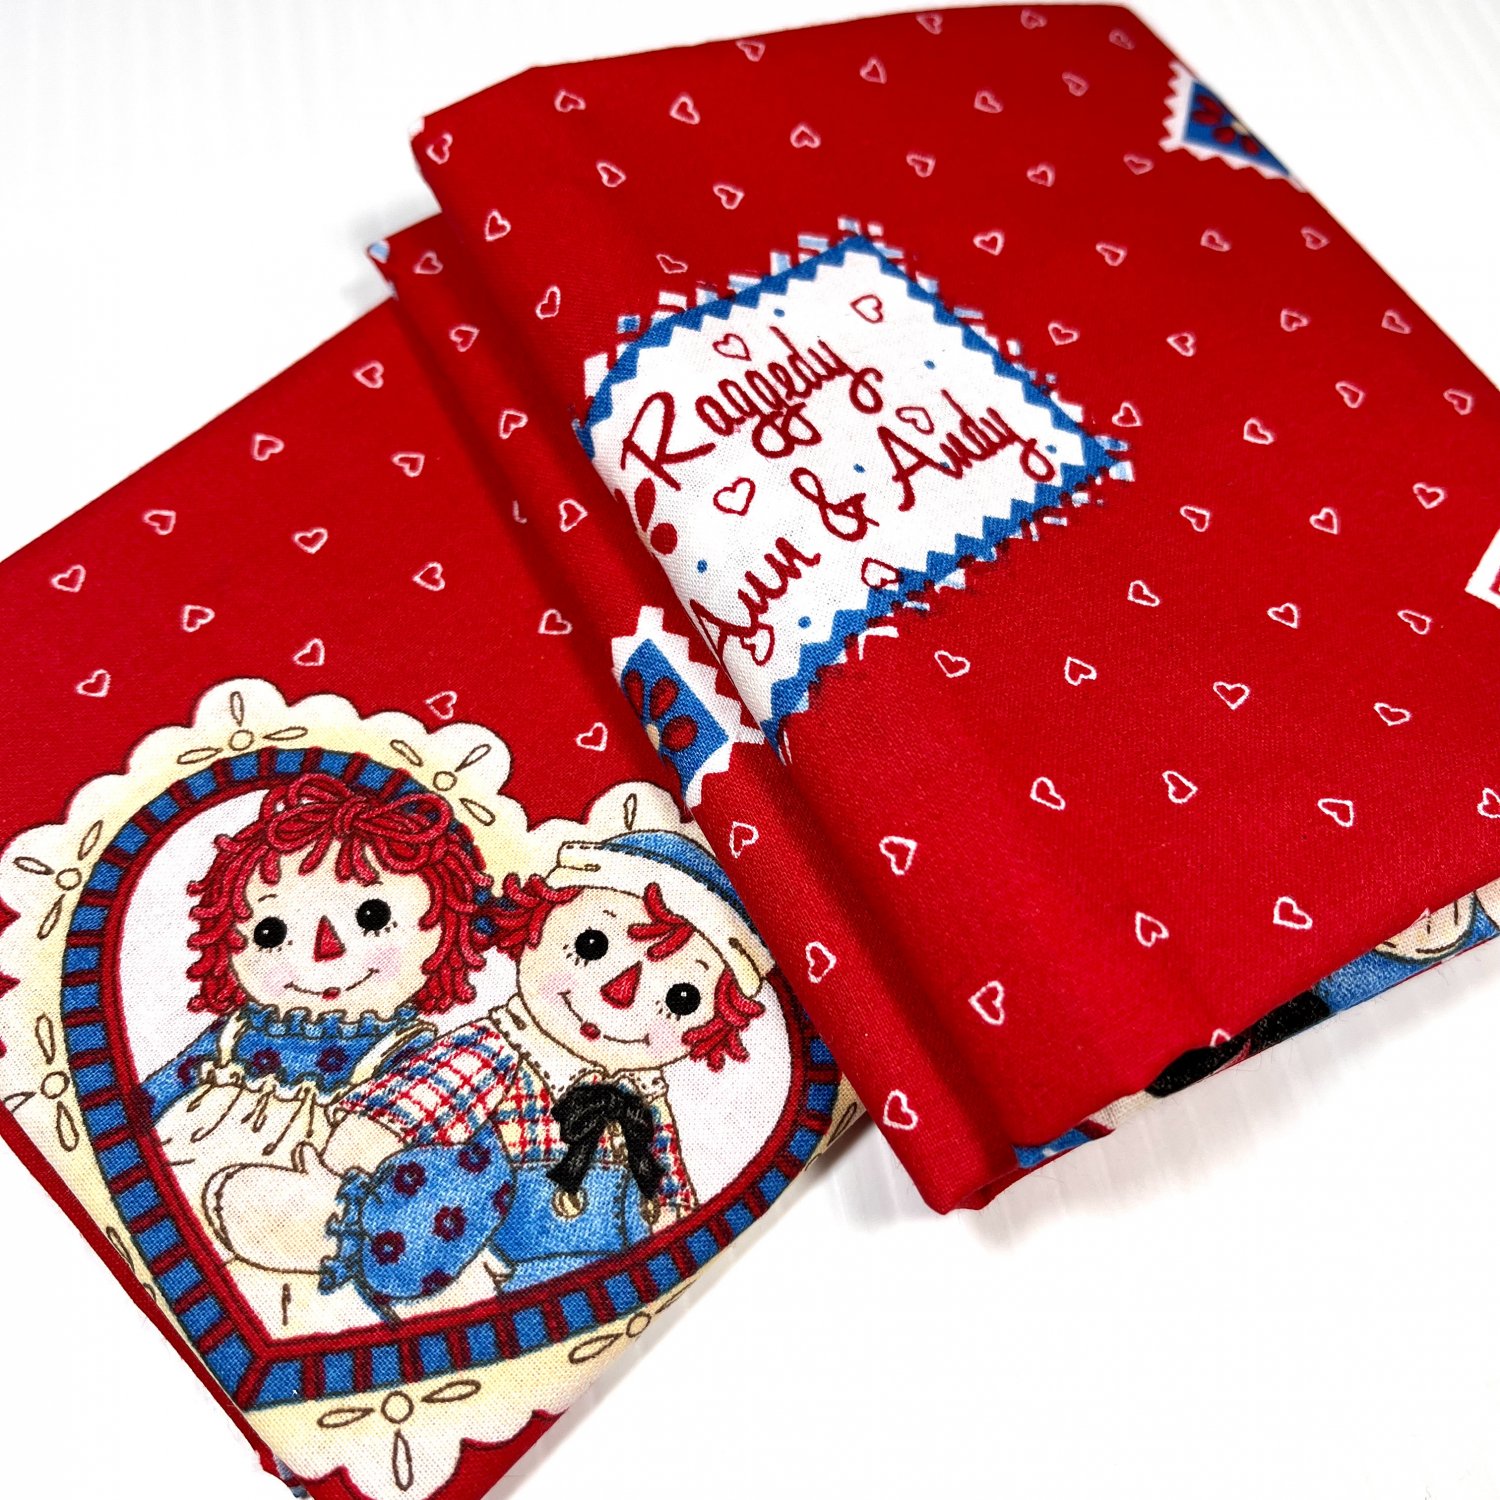 Raggedy Ann and Andy Friendship Fabric, Fat Quarter 2-Pack, 100% Cotton